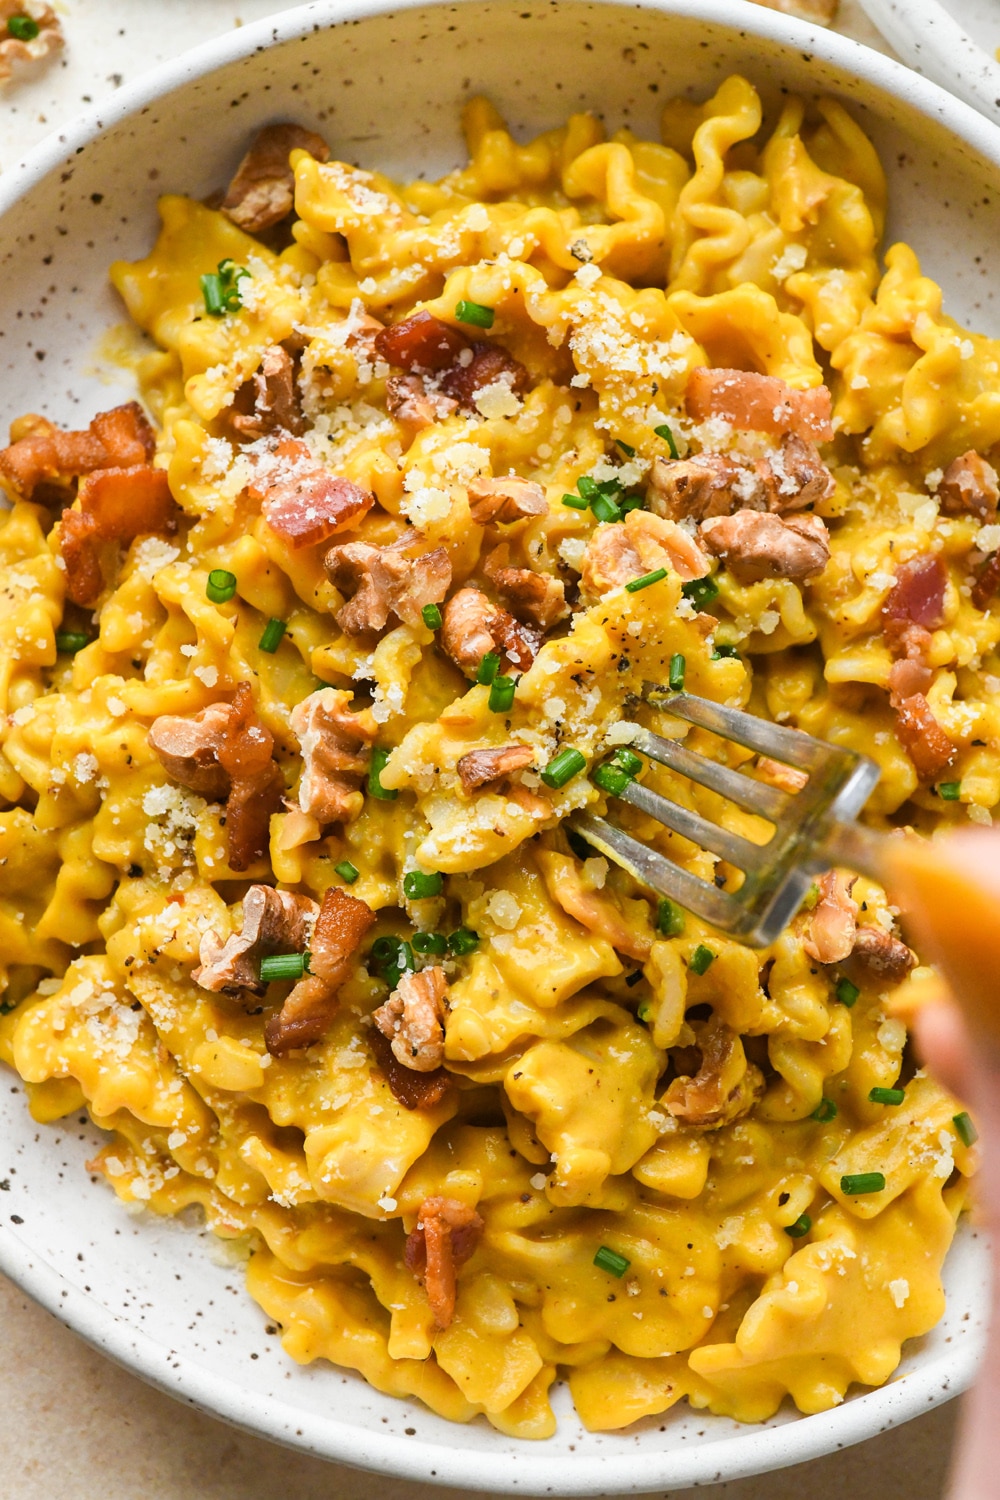 Creamy, dairy free butternut squash pasta with bacon, walnuts, and chives, in a shallow speckled ceramic bowl with a fork piercing a piece of pasta to show the creamy texture of the pasta sauce.